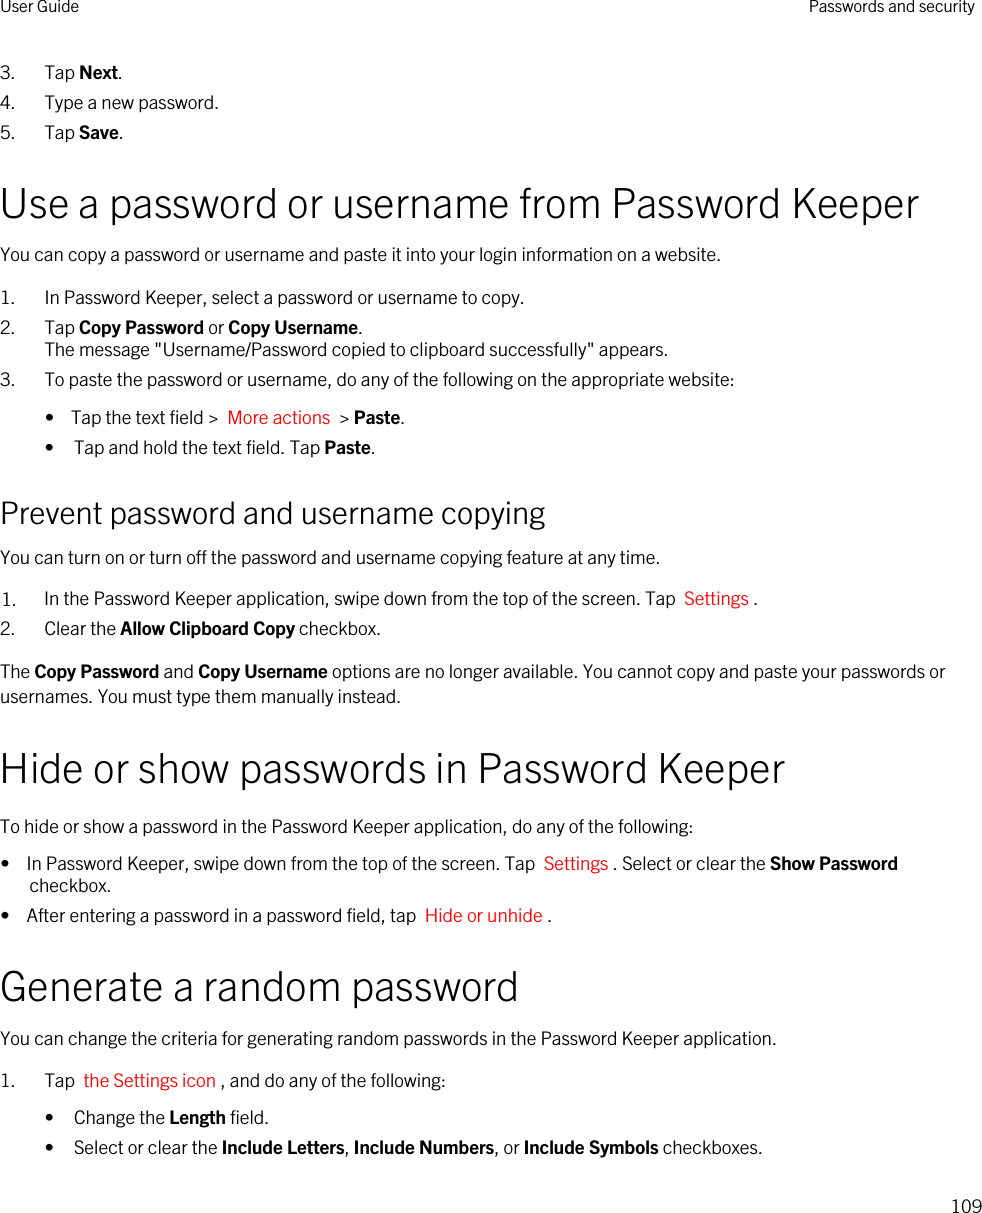 3. Tap Next.4. Type a new password.5. Tap Save.Use a password or username from Password KeeperYou can copy a password or username and paste it into your login information on a website.1. In Password Keeper, select a password or username to copy.2. Tap Copy Password or Copy Username.The message &quot;Username/Password copied to clipboard successfully&quot; appears.3. To paste the password or username, do any of the following on the appropriate website:•  Tap the text field &gt;  More actions  &gt; Paste.• Tap and hold the text field. Tap Paste.Prevent password and username copyingYou can turn on or turn off the password and username copying feature at any time.1. In the Password Keeper application, swipe down from the top of the screen. Tap  Settings .2. Clear the Allow Clipboard Copy checkbox.The Copy Password and Copy Username options are no longer available. You cannot copy and paste your passwords or usernames. You must type them manually instead.Hide or show passwords in Password KeeperTo hide or show a password in the Password Keeper application, do any of the following:•  In Password Keeper, swipe down from the top of the screen. Tap  Settings . Select or clear the Show Password checkbox.•  After entering a password in a password field, tap  Hide or unhide .Generate a random passwordYou can change the criteria for generating random passwords in the Password Keeper application.1. Tap  the Settings icon , and do any of the following:• Change the Length field.• Select or clear the Include Letters, Include Numbers, or Include Symbols checkboxes.User Guide Passwords and security109